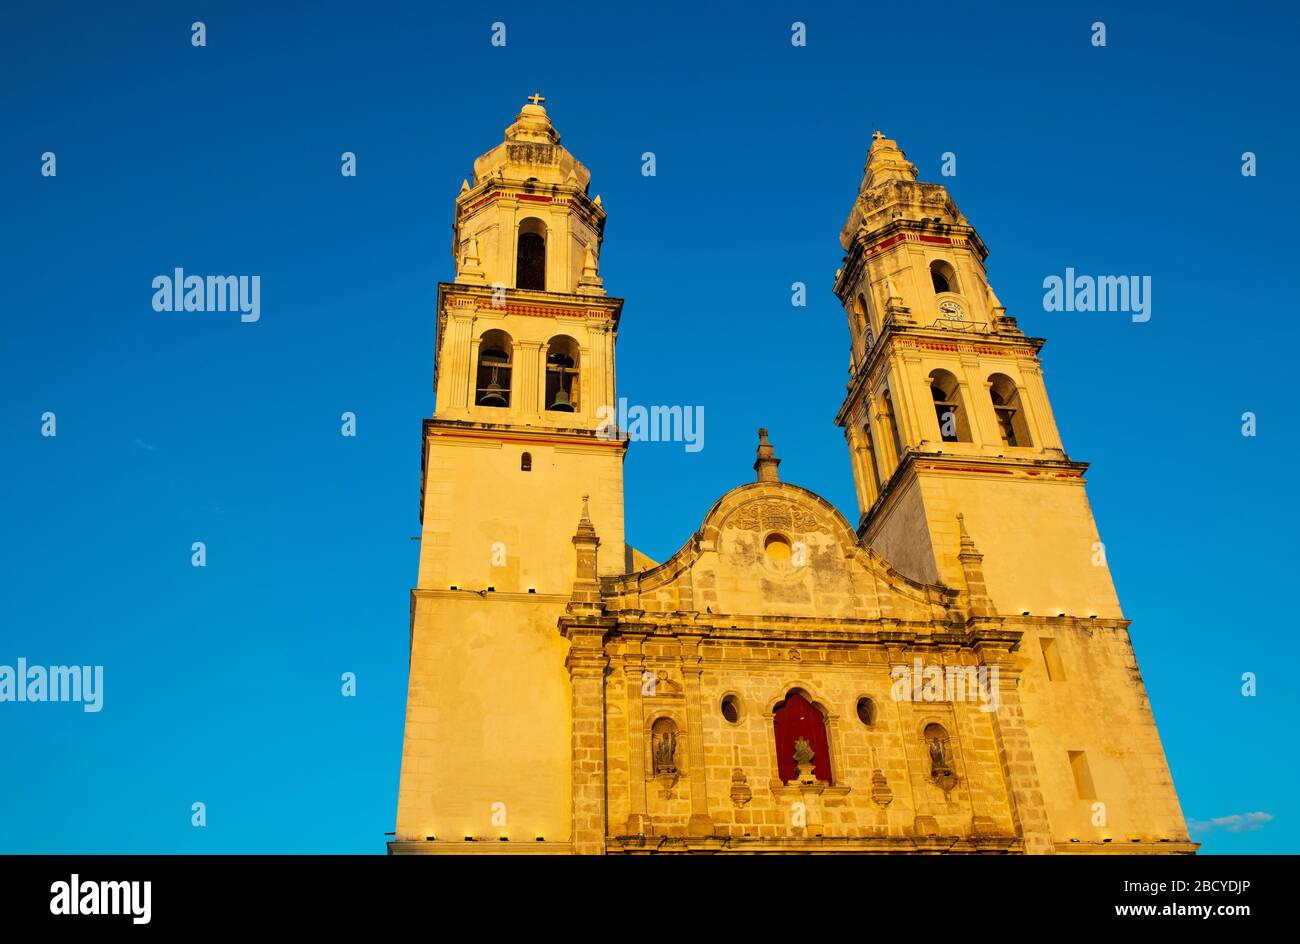 Facade of the Our Lady of the Immaculate Conception Cathedral, known as the Cienfuegos Cathedral, at sunset, Campeche City, Yucatan Peninsula, Mexico. Stock Photo